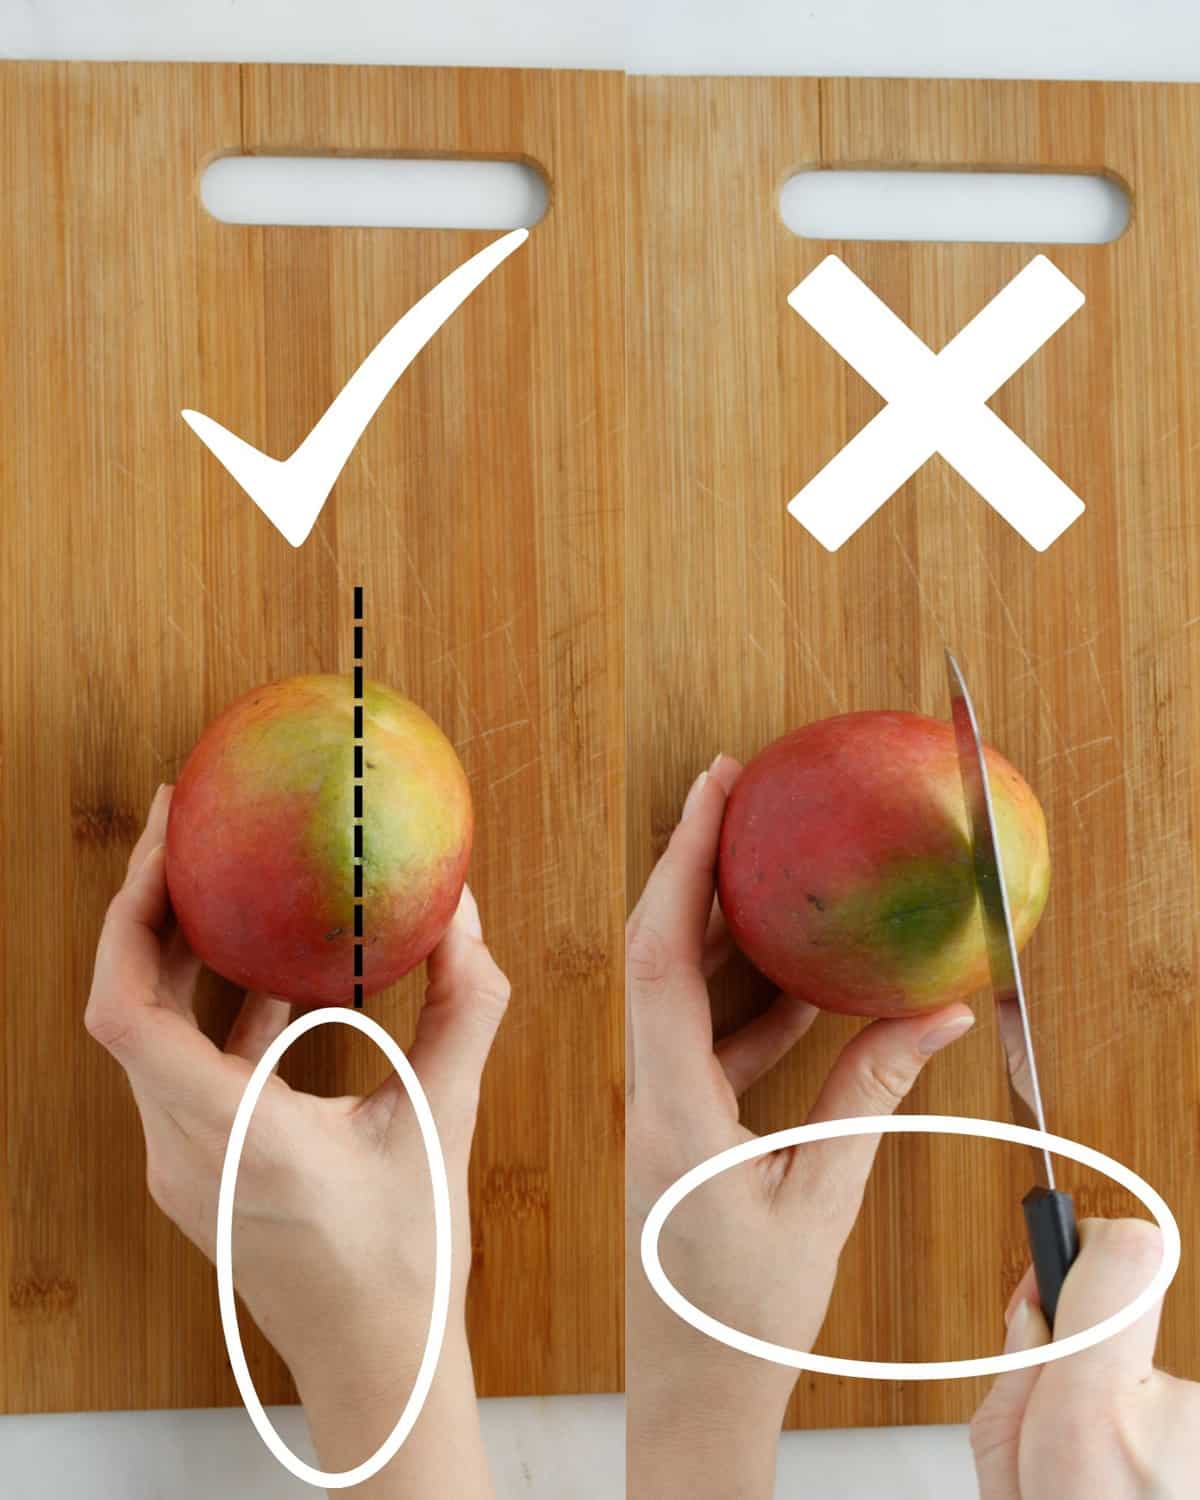 How to correctly slice a mango, shown on the left side, and shown on the right side is an image of how to incorrectly slice into a mango.